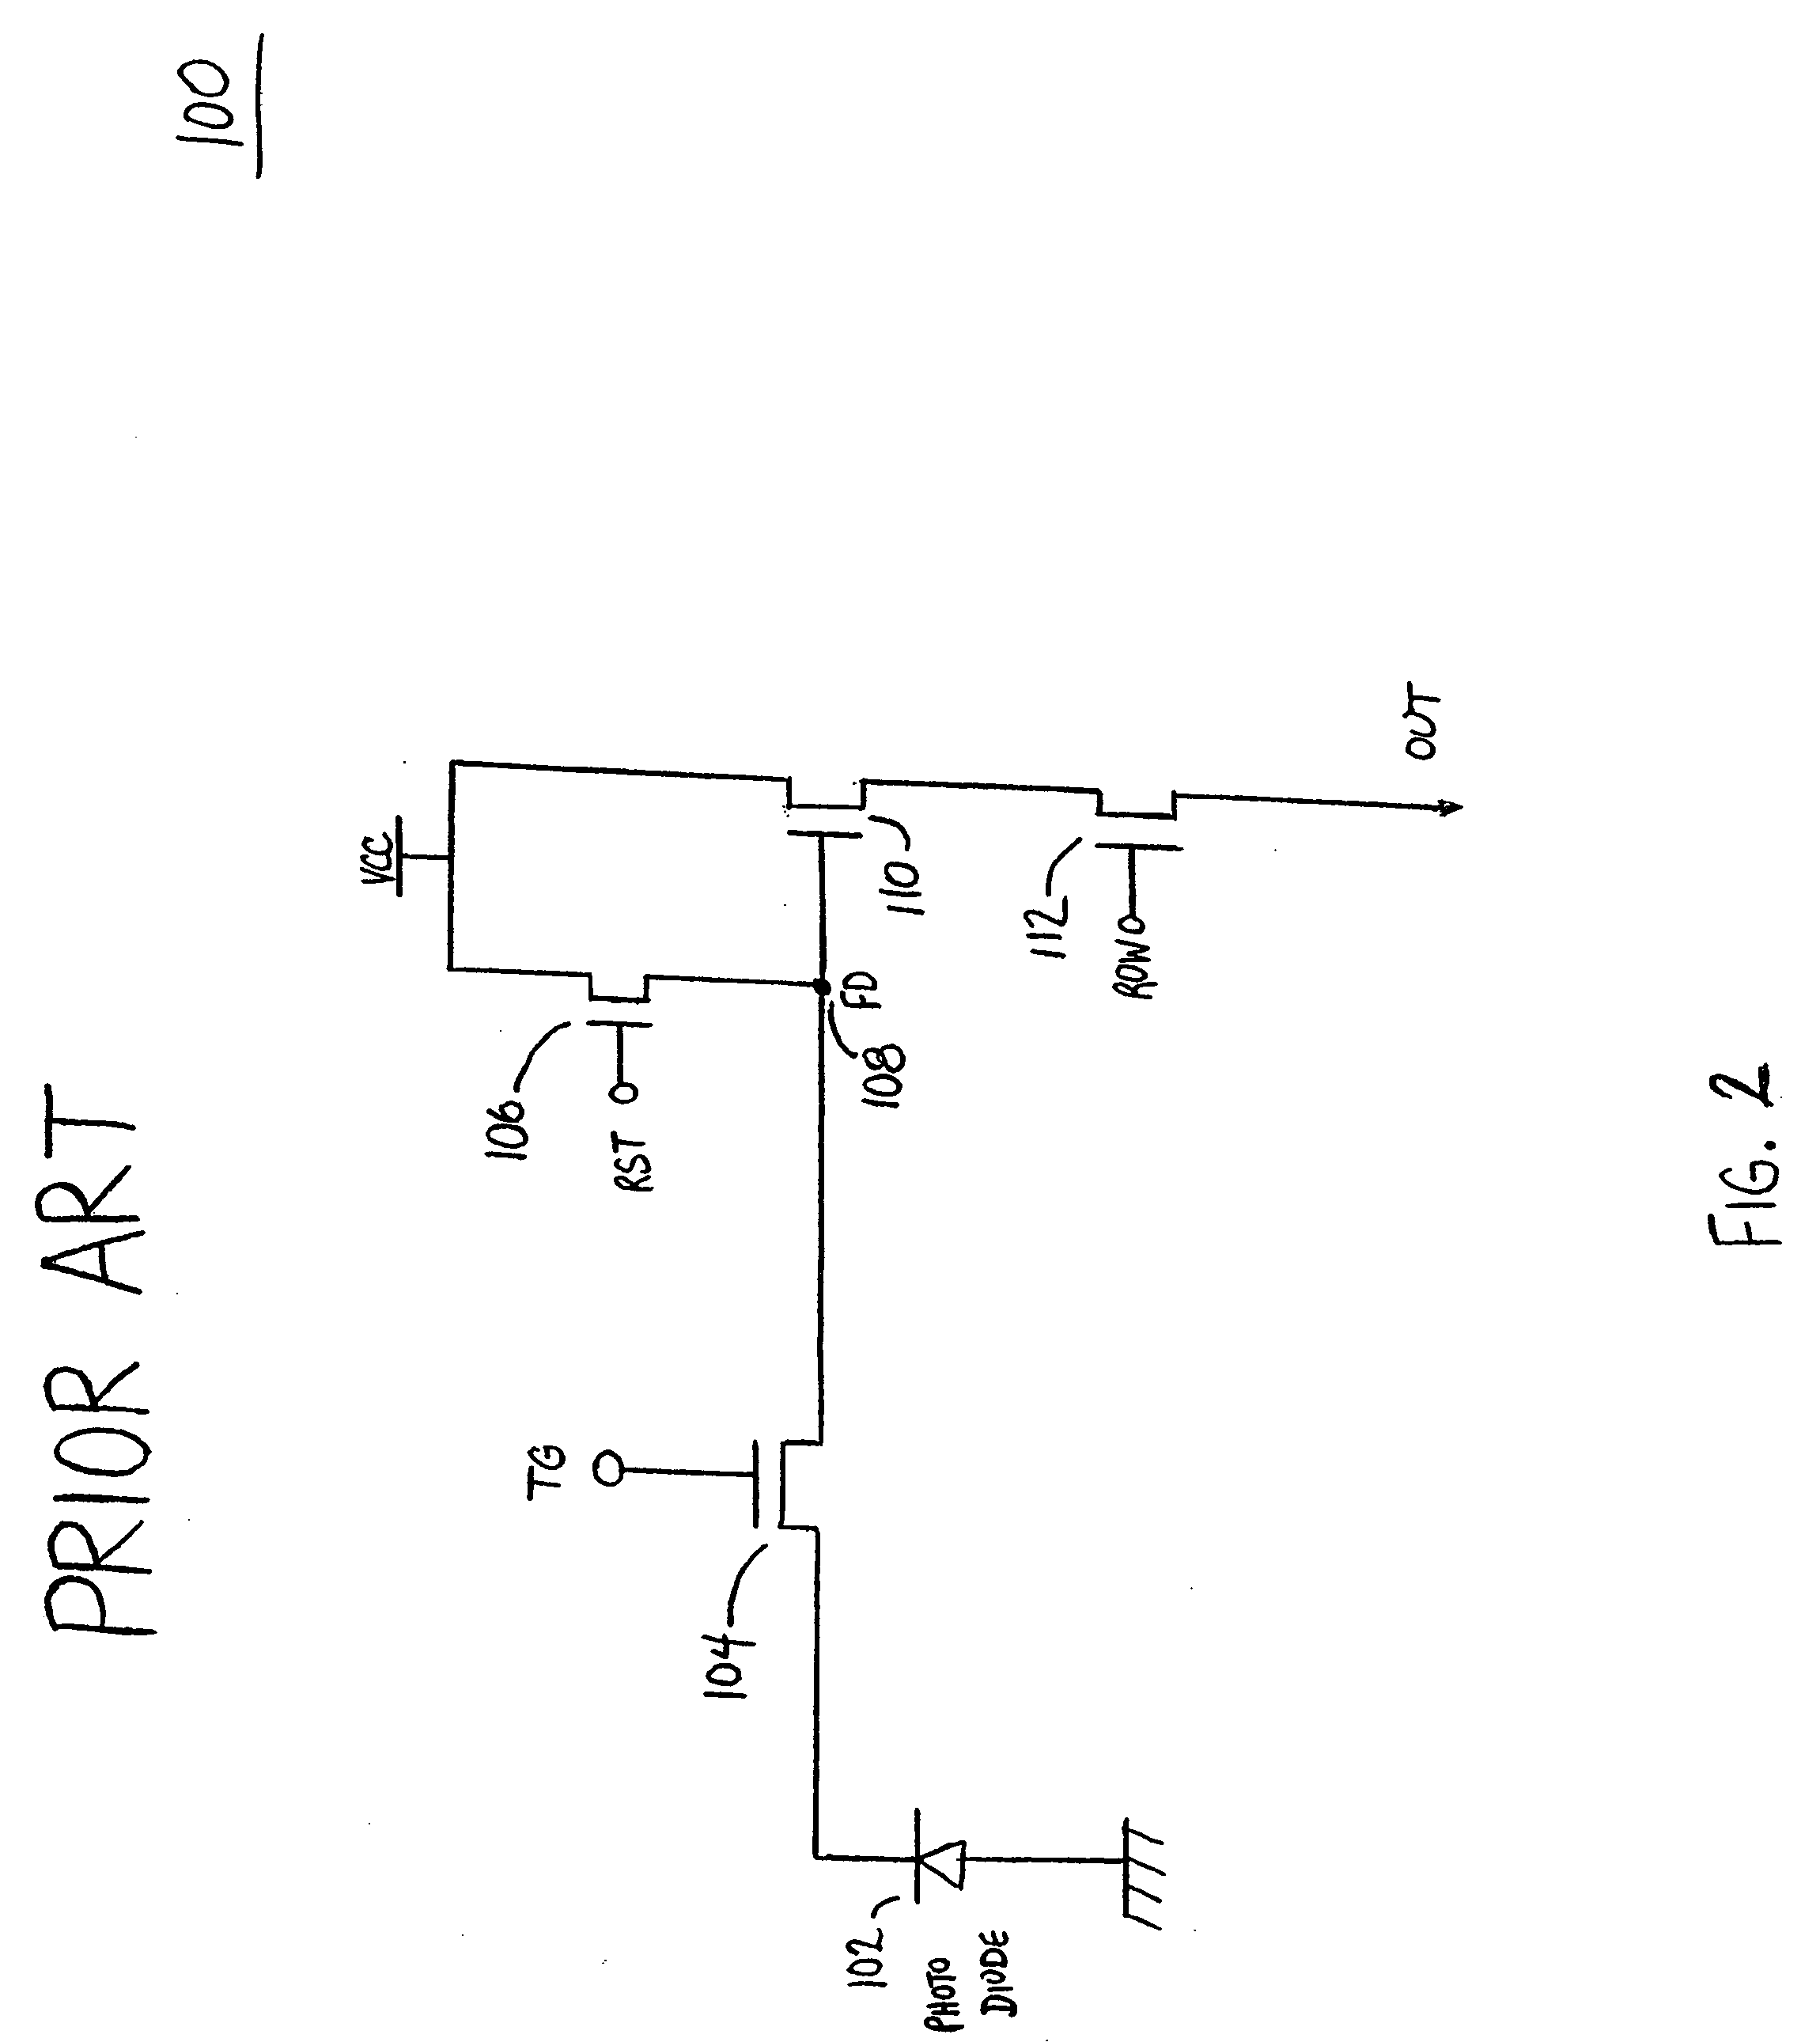 Simple/cascode configurable current source for image sensor